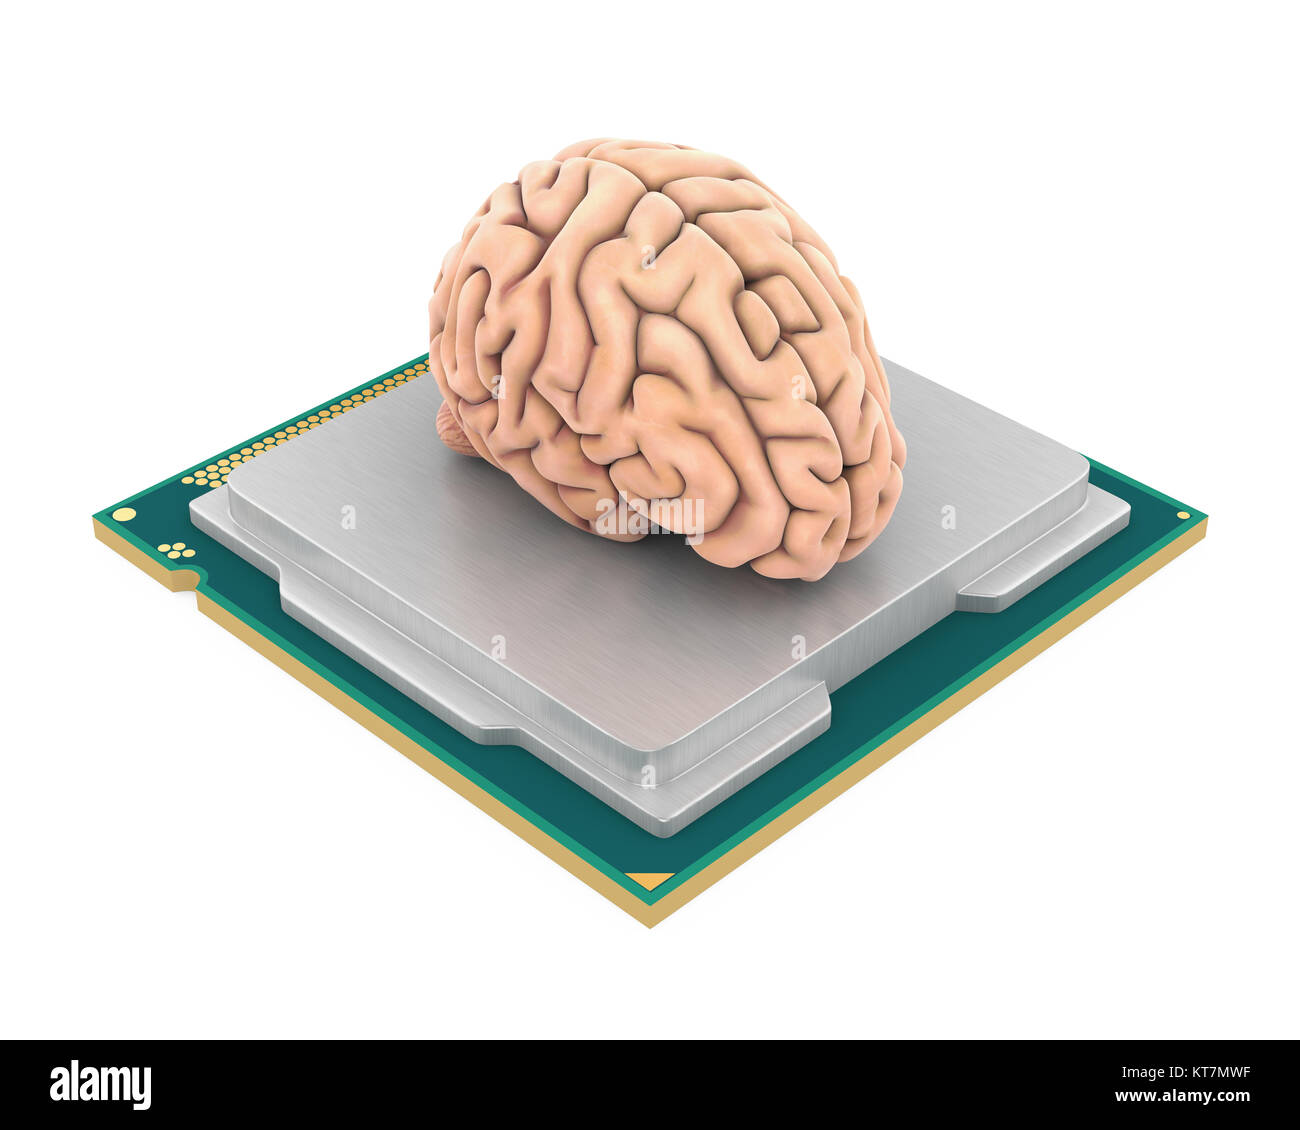 Computer Processor CPU with Human Brain Isolated Stock Photo - Alamy